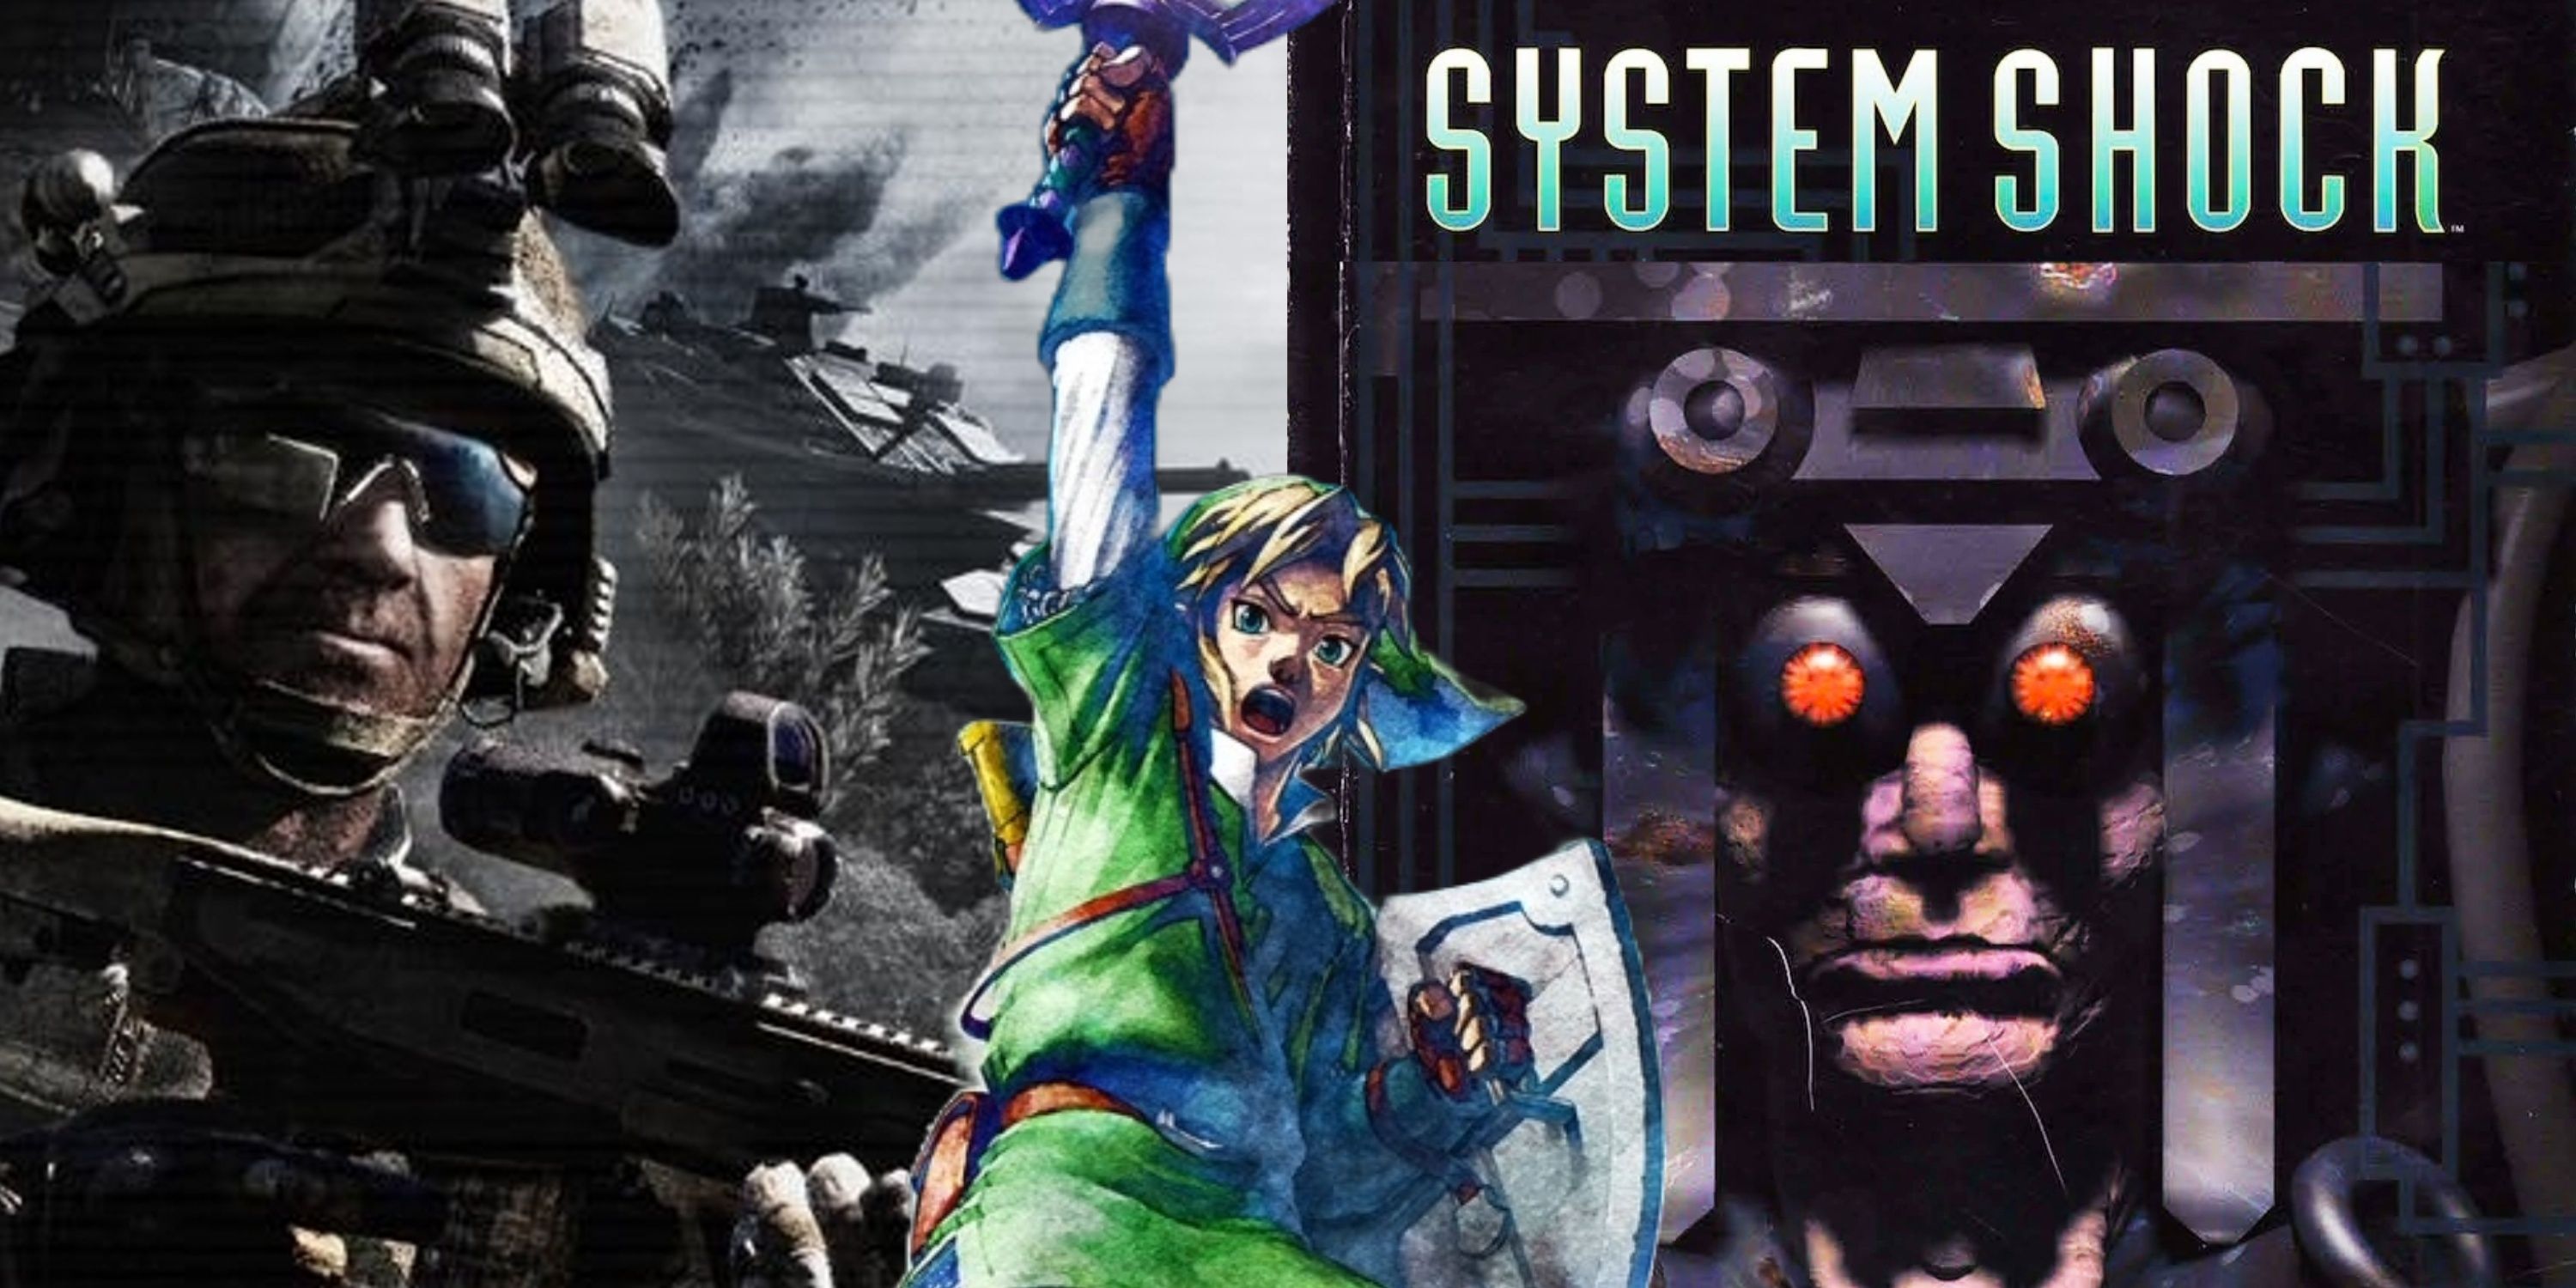 Great Games With Difficult Controls Featured Image - Arma 3 + Skyward Sword + System Shock (1994)